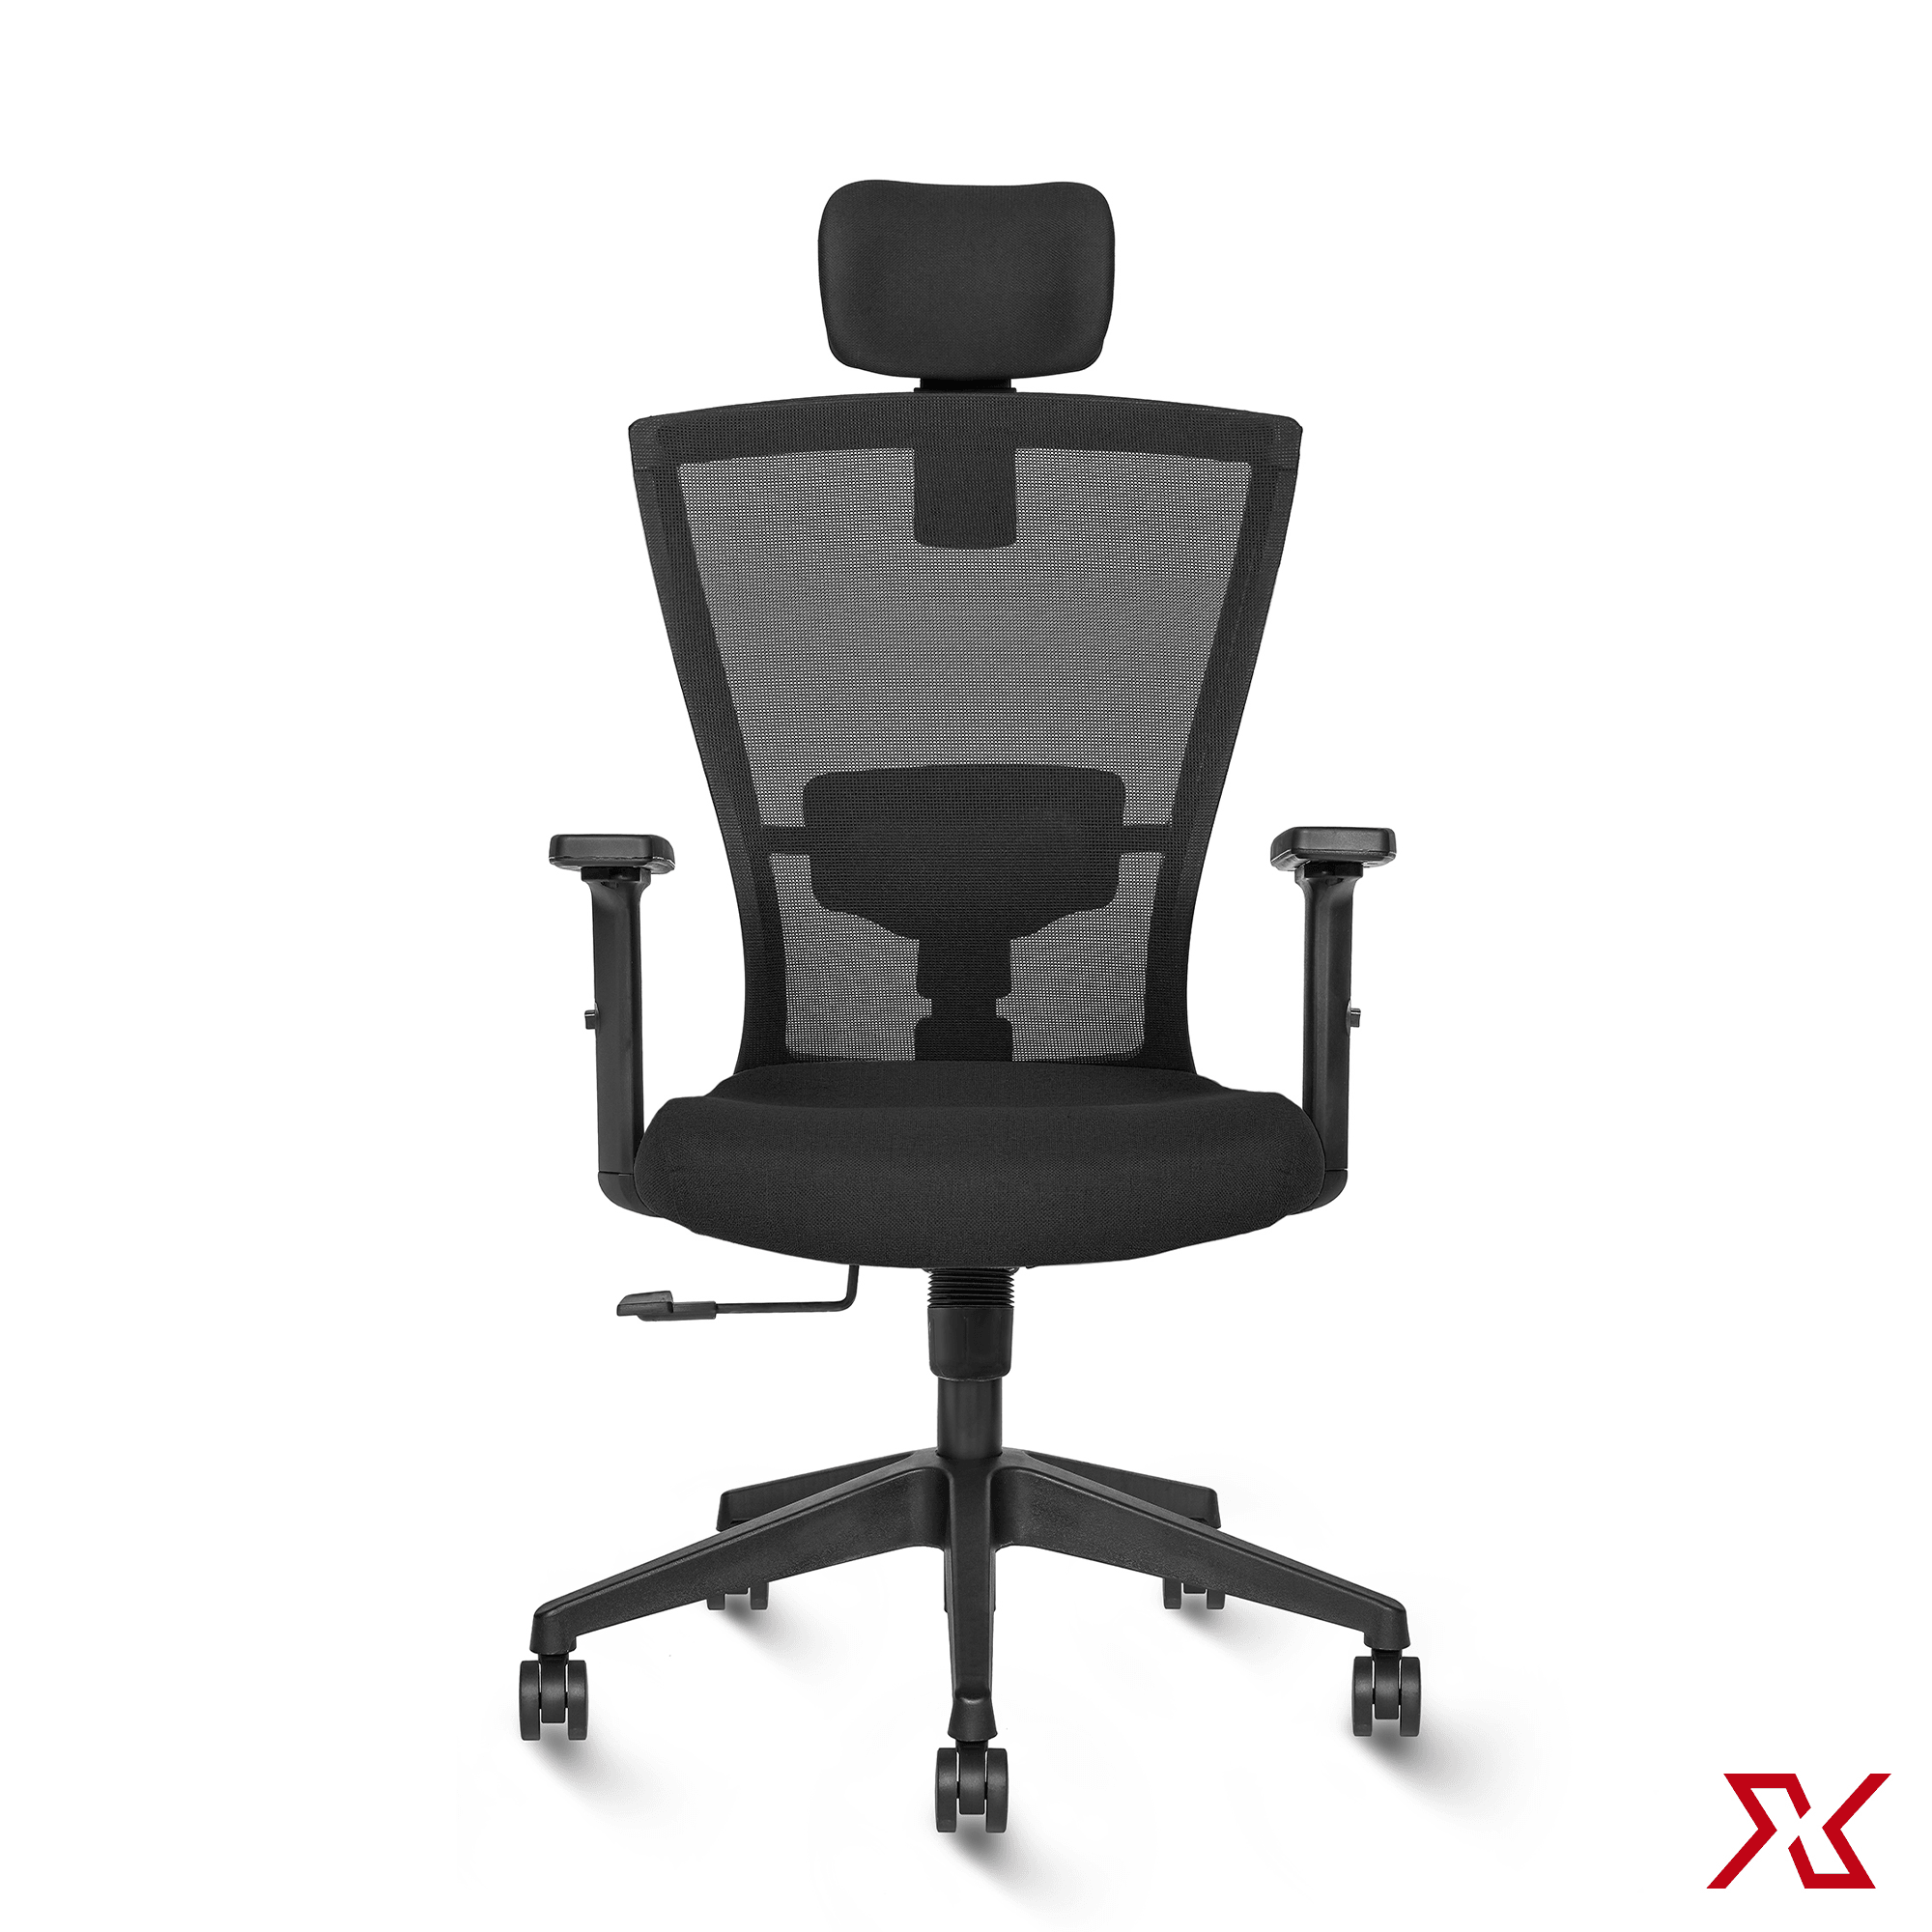 ZINC High Back LX (Black Chair) - Exclusiff Seating Sytems